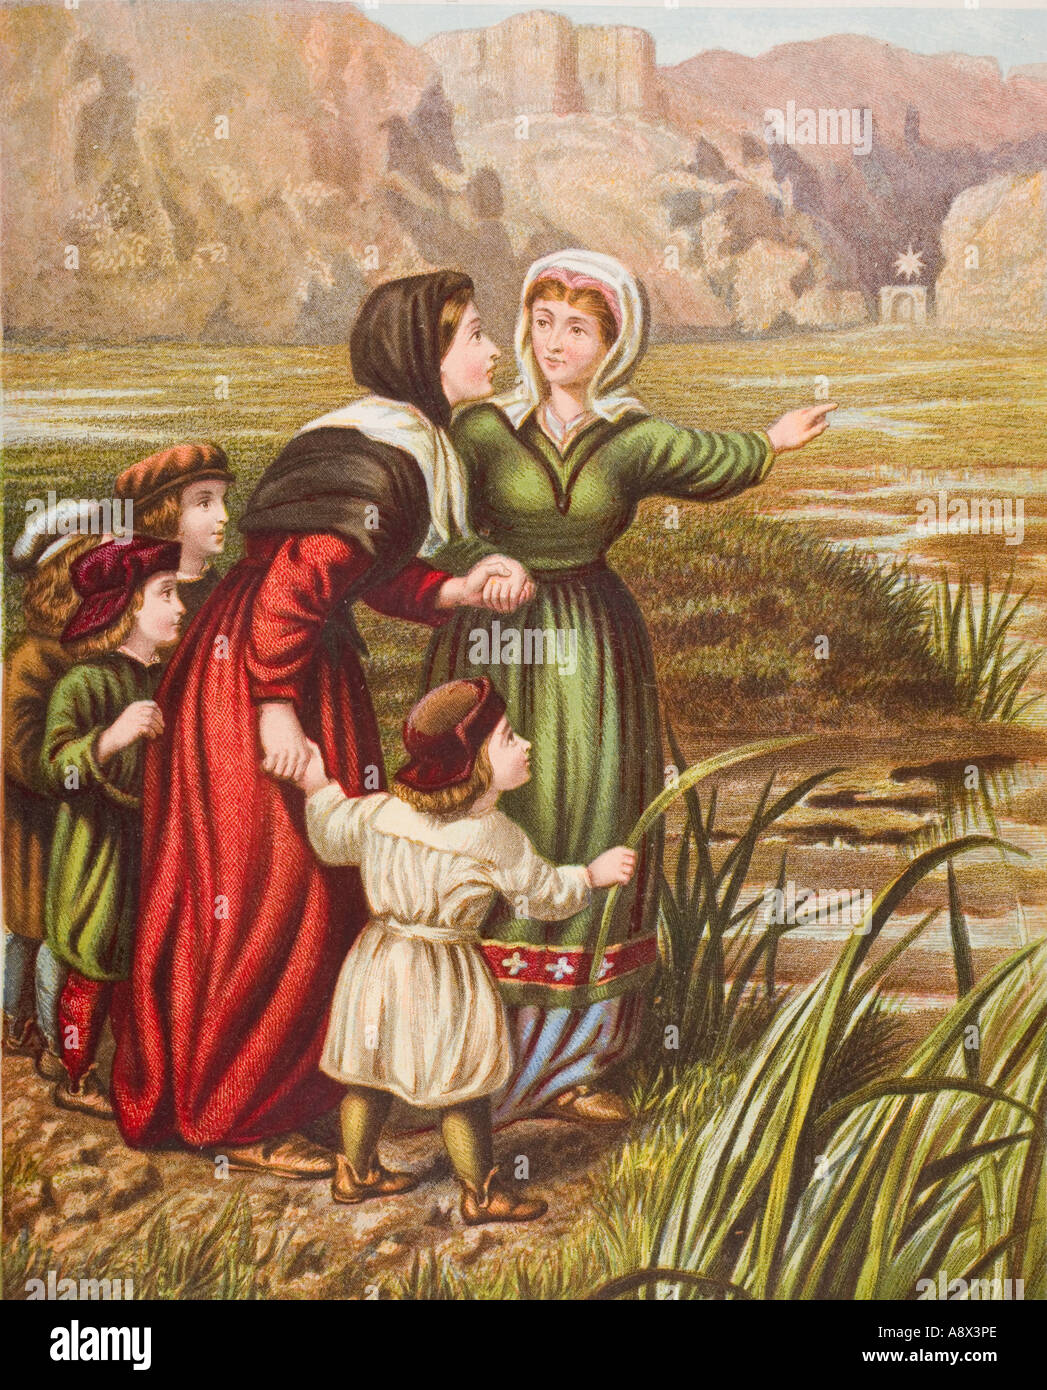 Christiana and Mercy at the Slough of Despond. From the book The Pilgrim's Progress by John Bunyan, late 19th century edition. Stock Photo